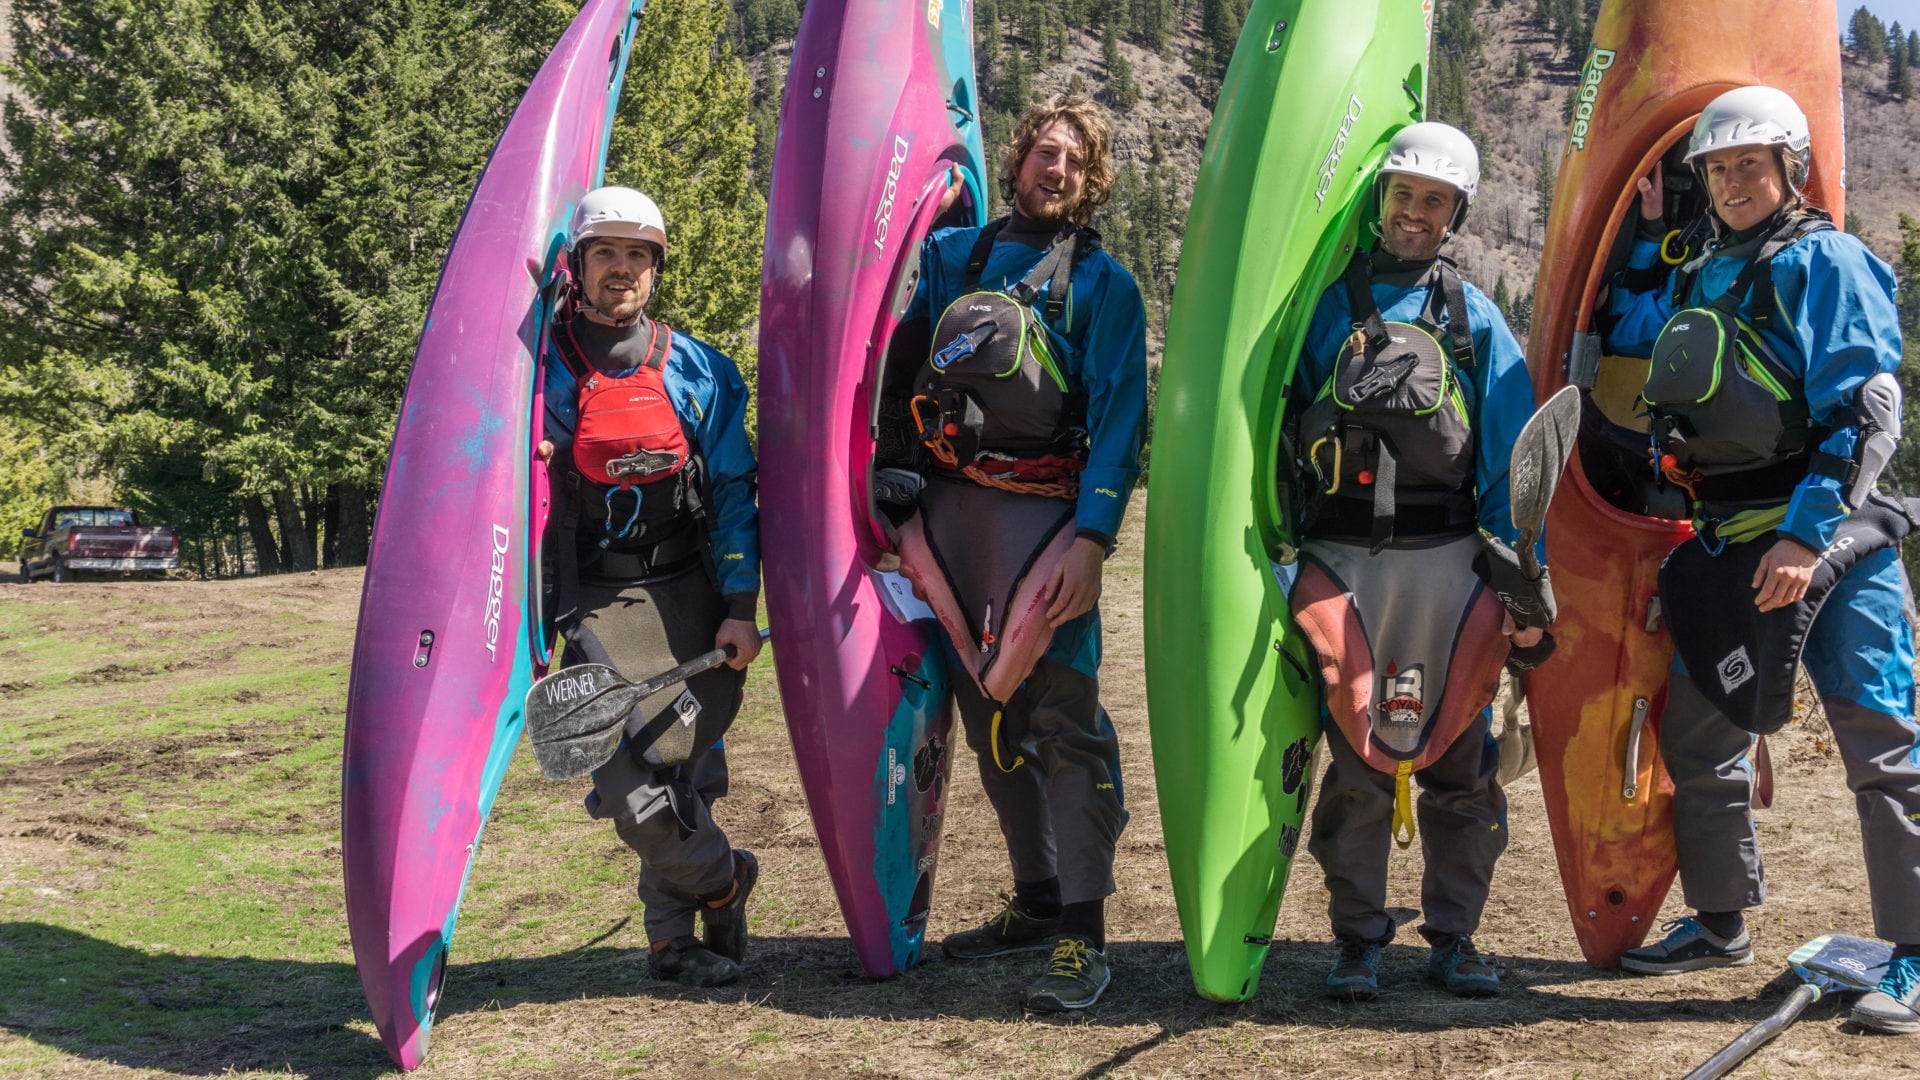 A Beginners Guide to Whitewater Kayaking Gear - Kootenay Mountain